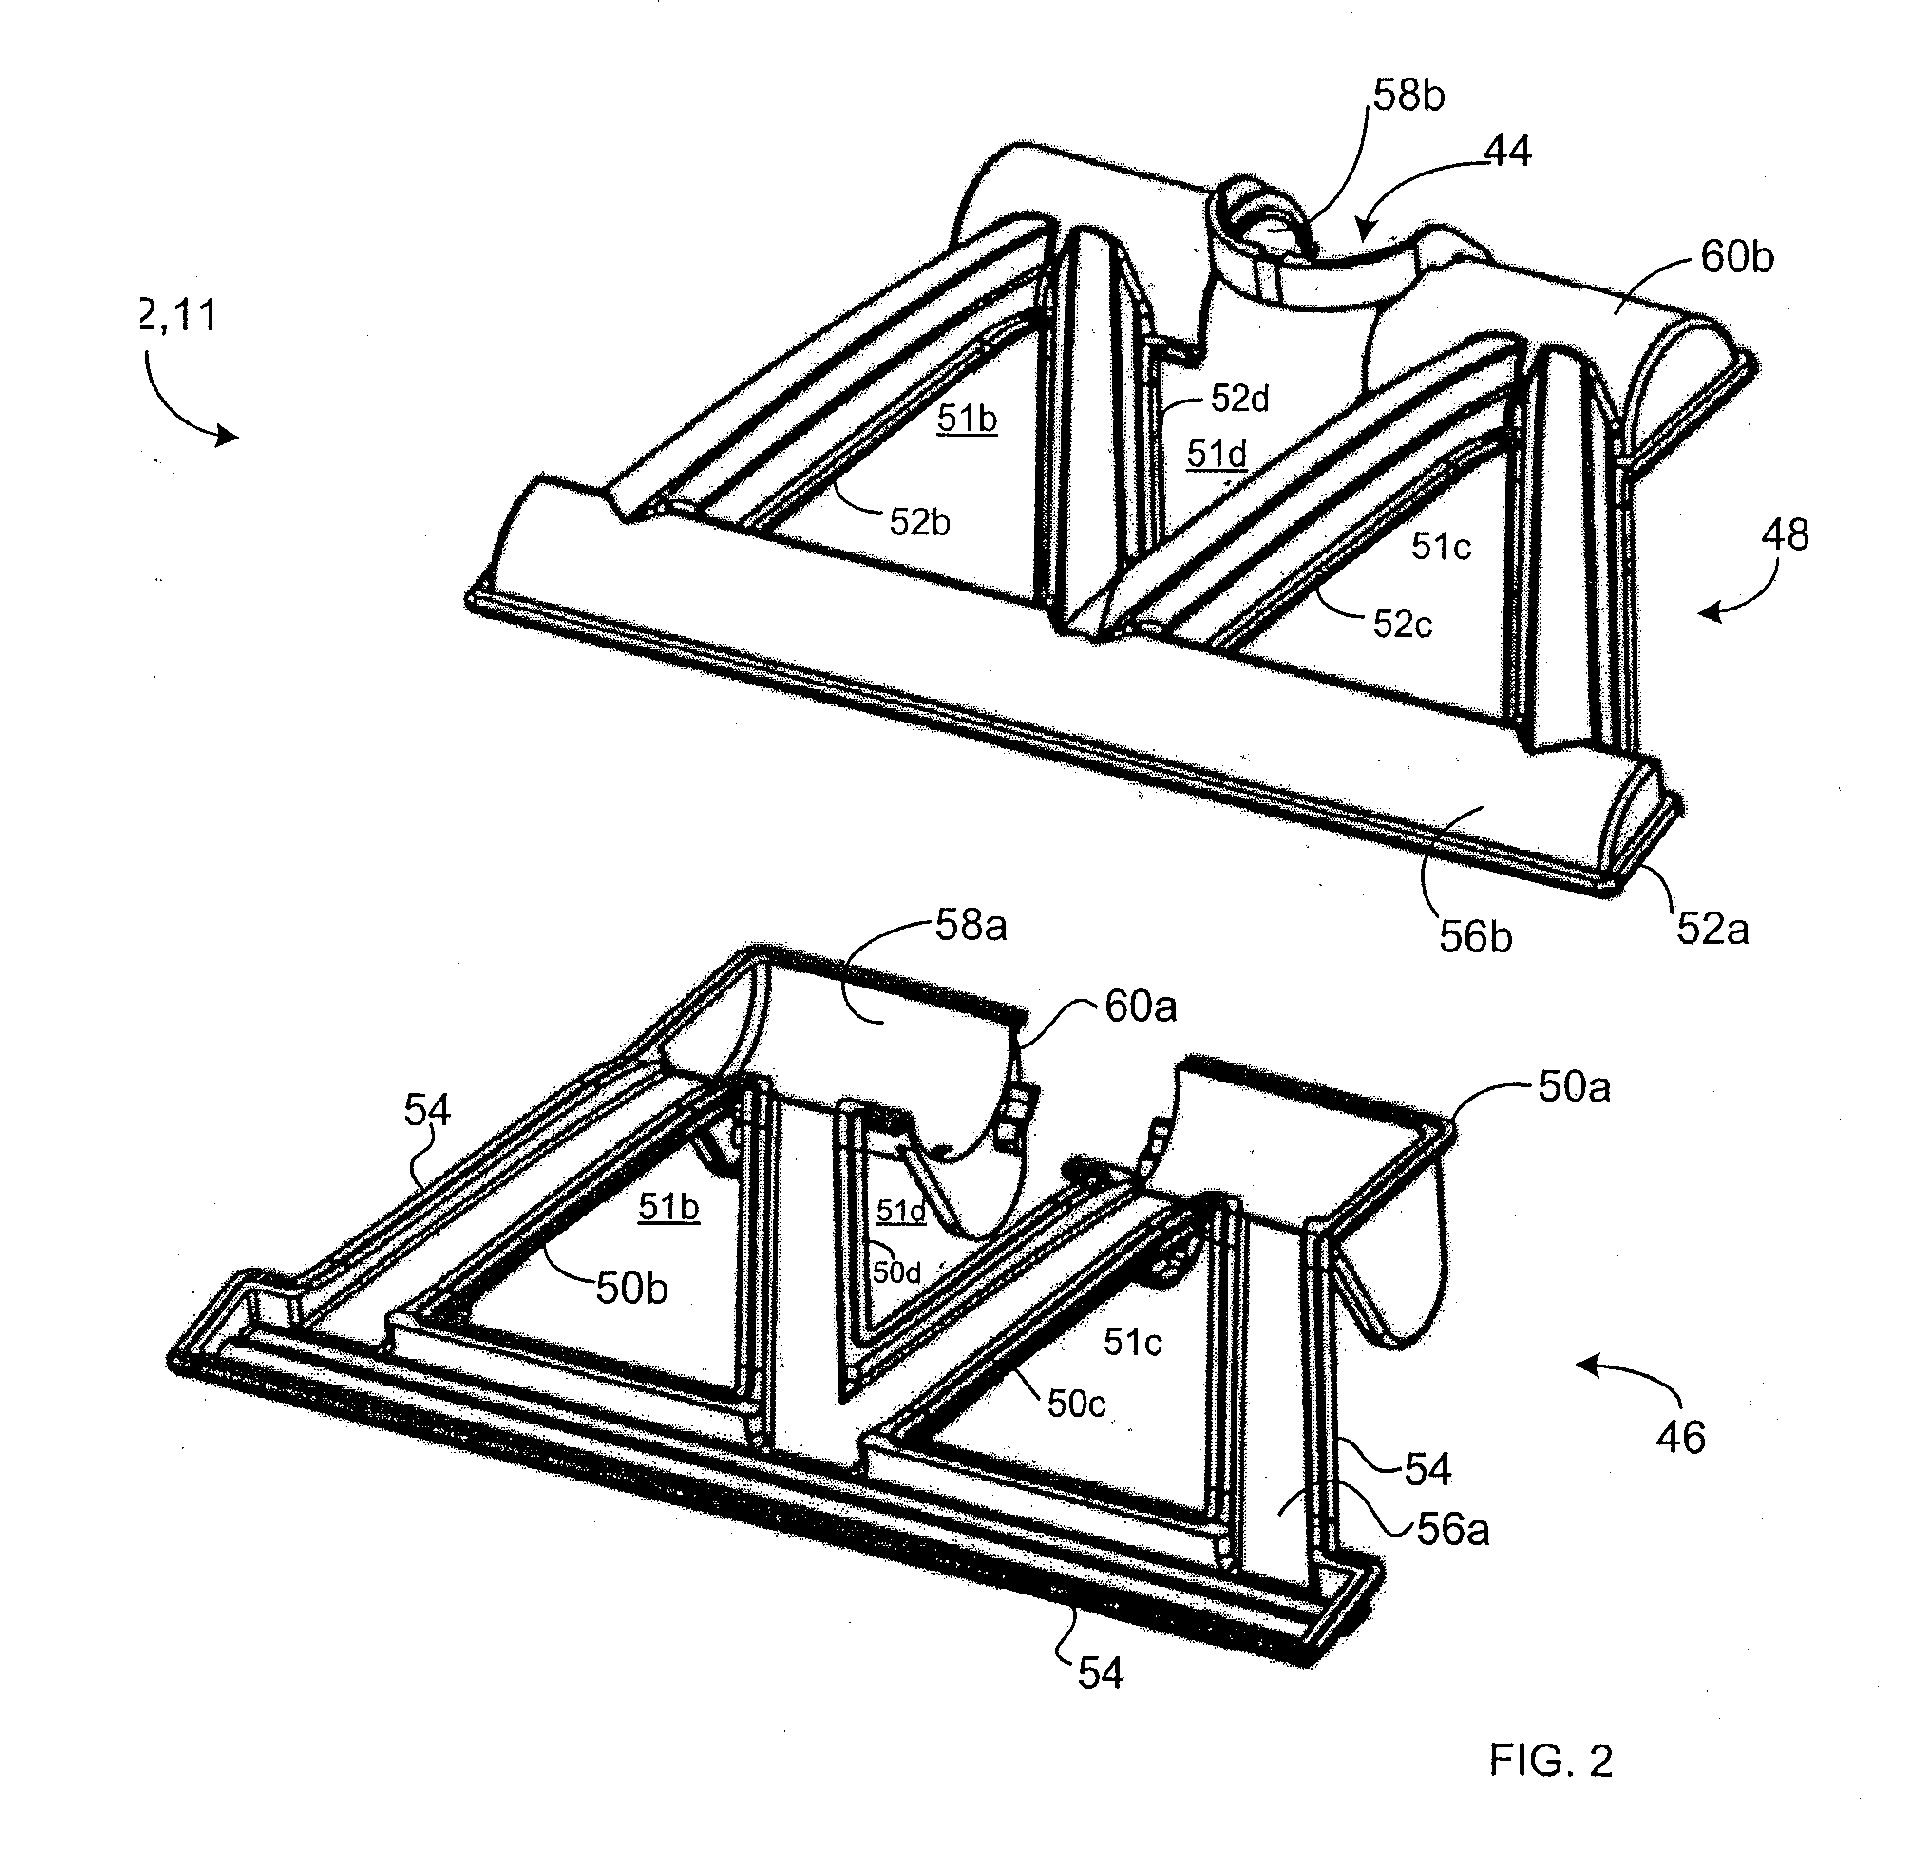 Resistively welded part for an appliance including a surface cleaning apparatus